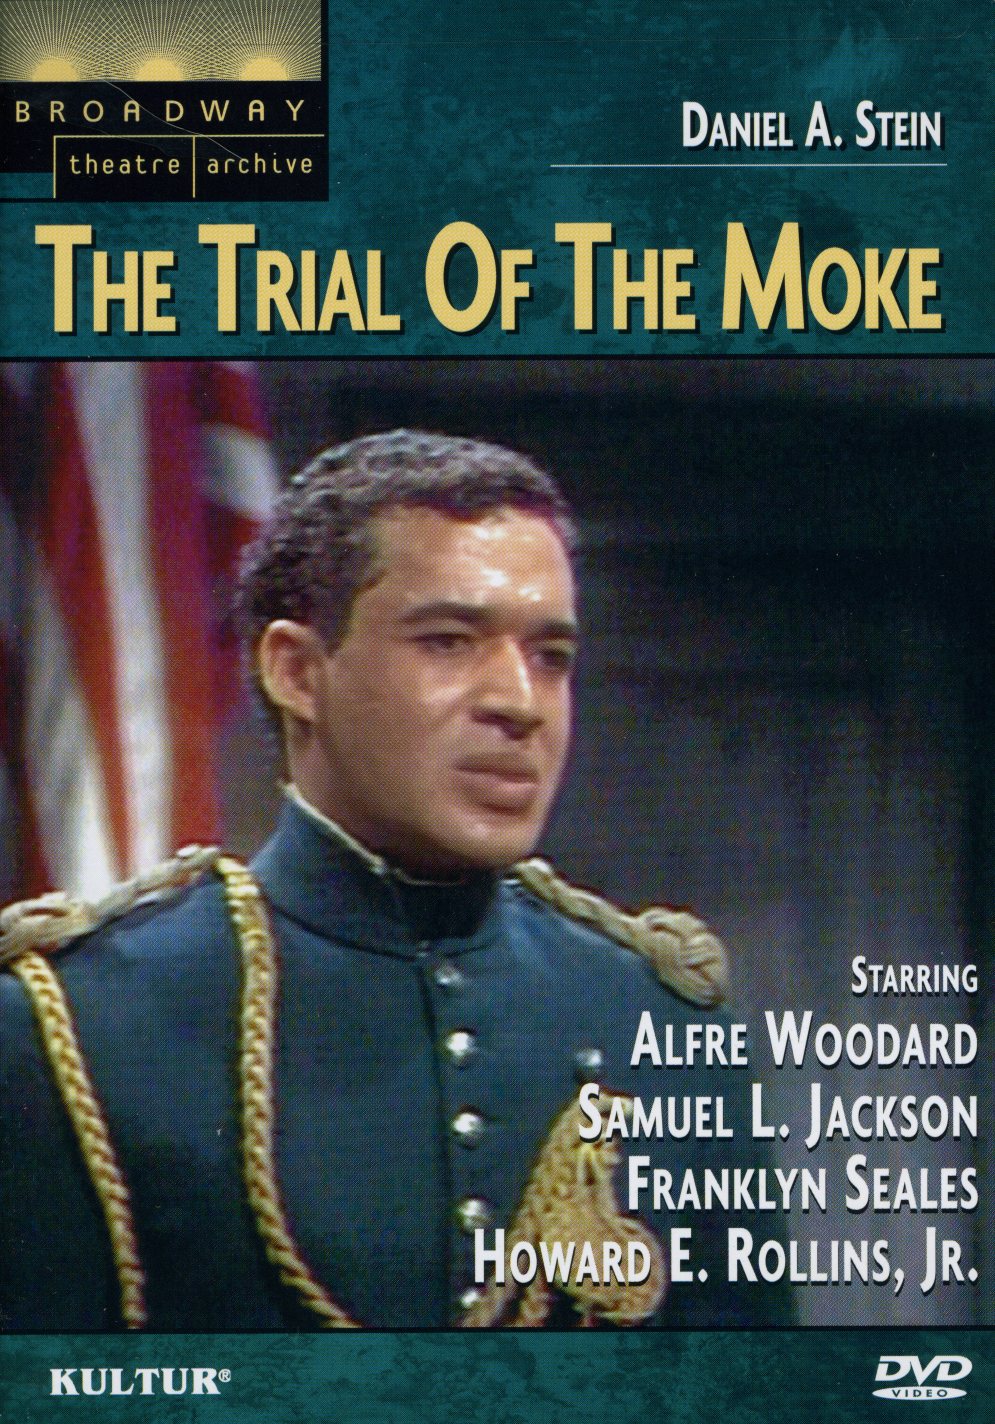 TRIAL OF THE MOKE